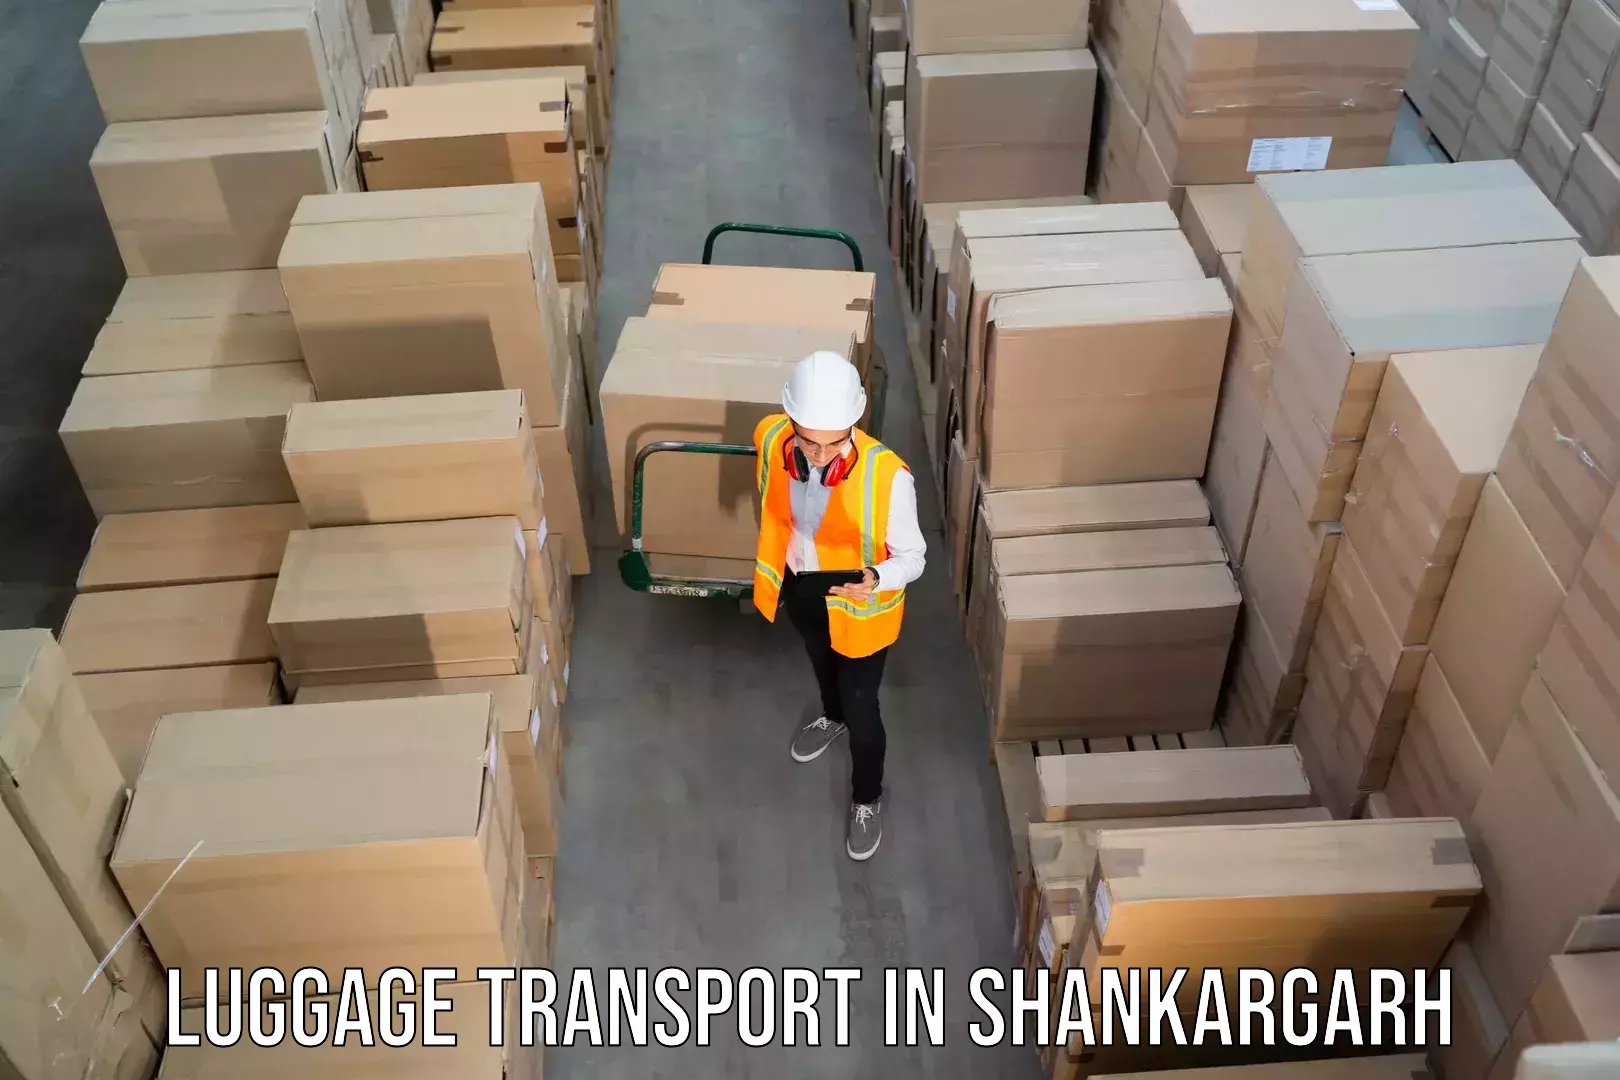 Automated luggage transport in Shankargarh